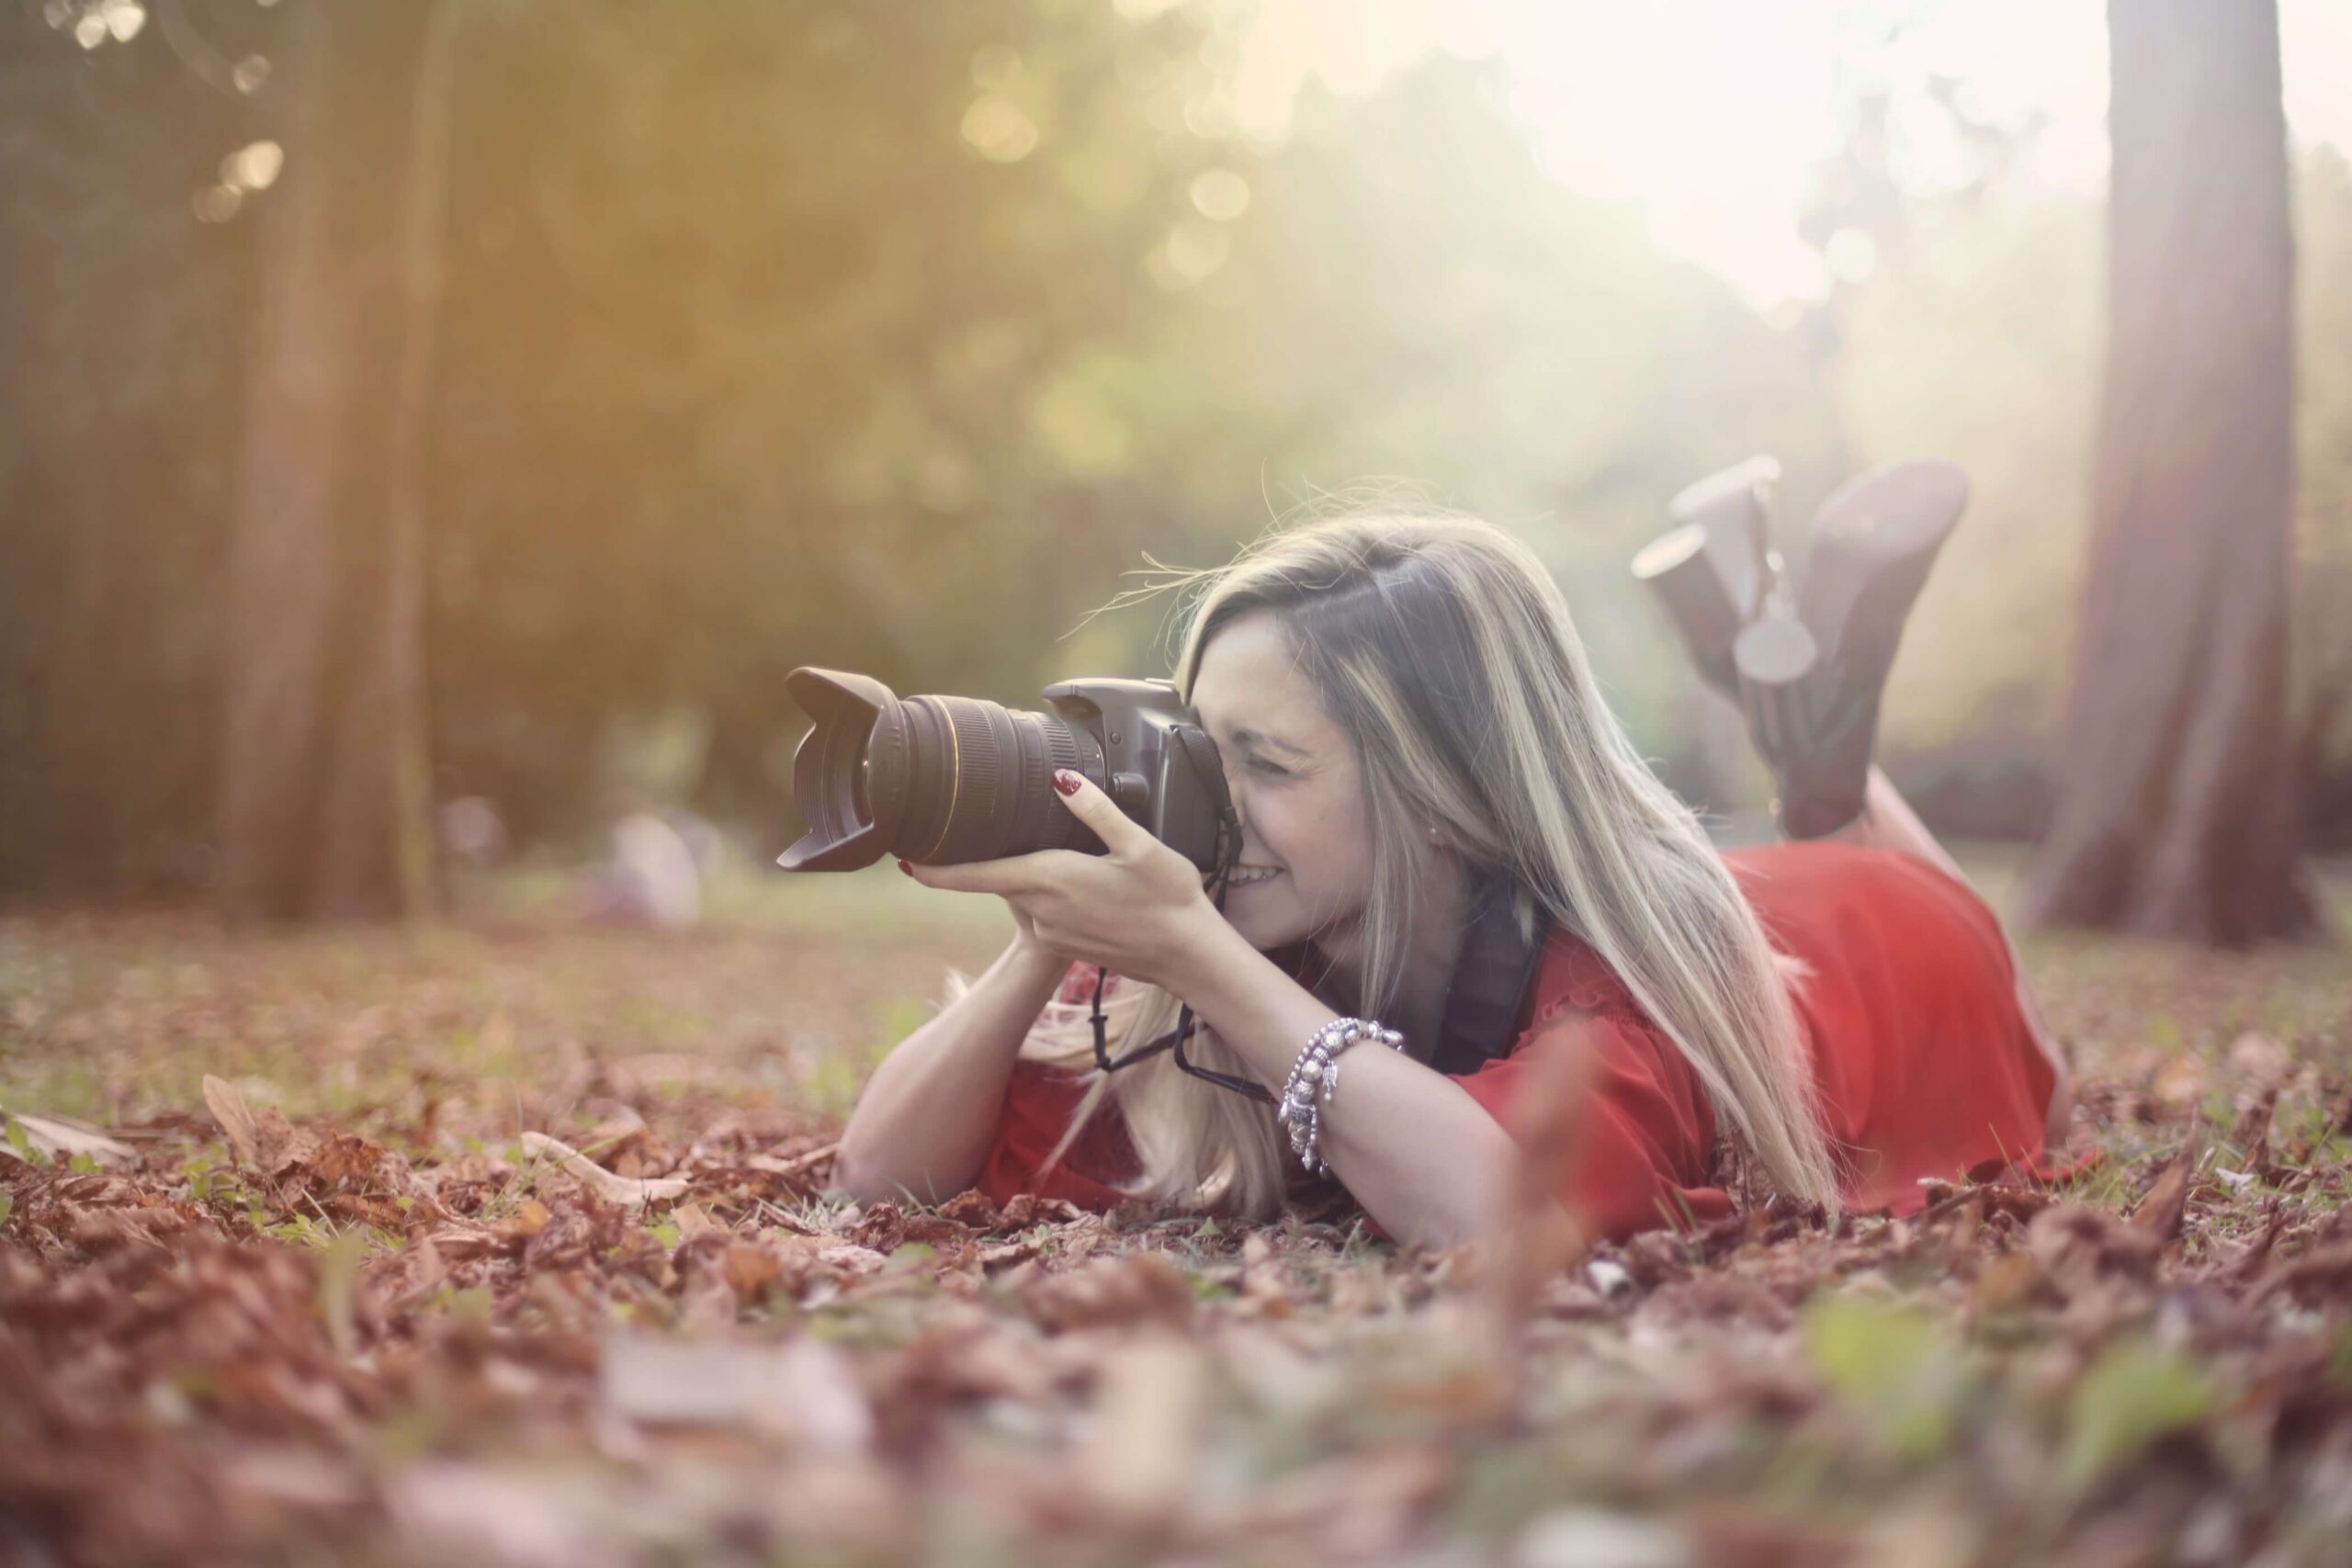 Photography tips to get a better photoshoot